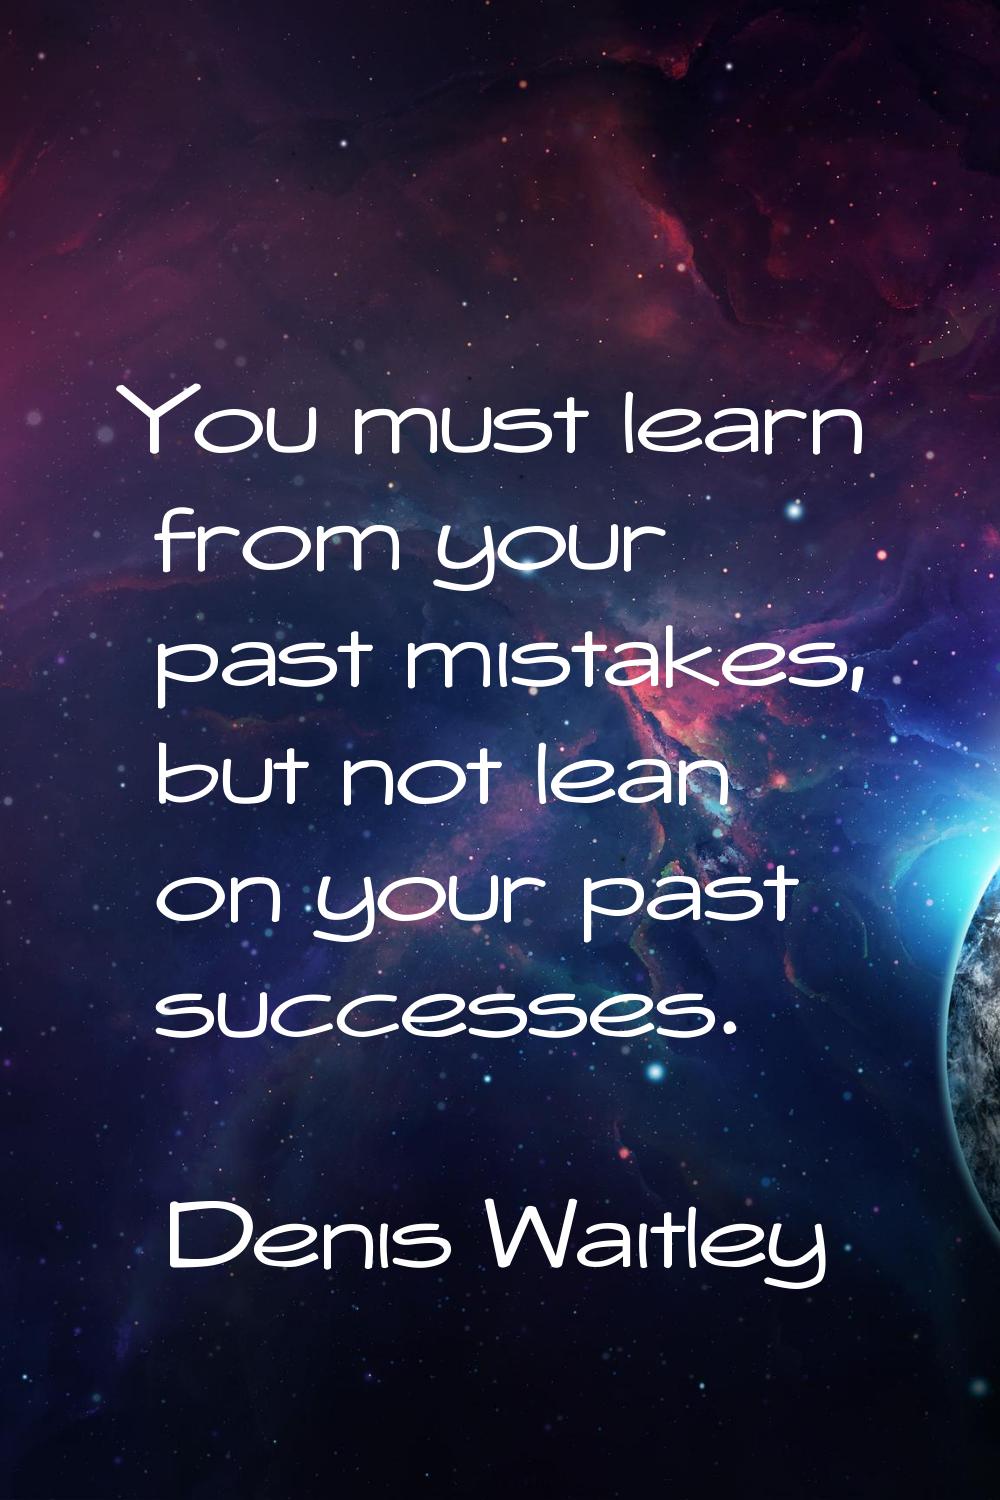 You must learn from your past mistakes, but not lean on your past successes.